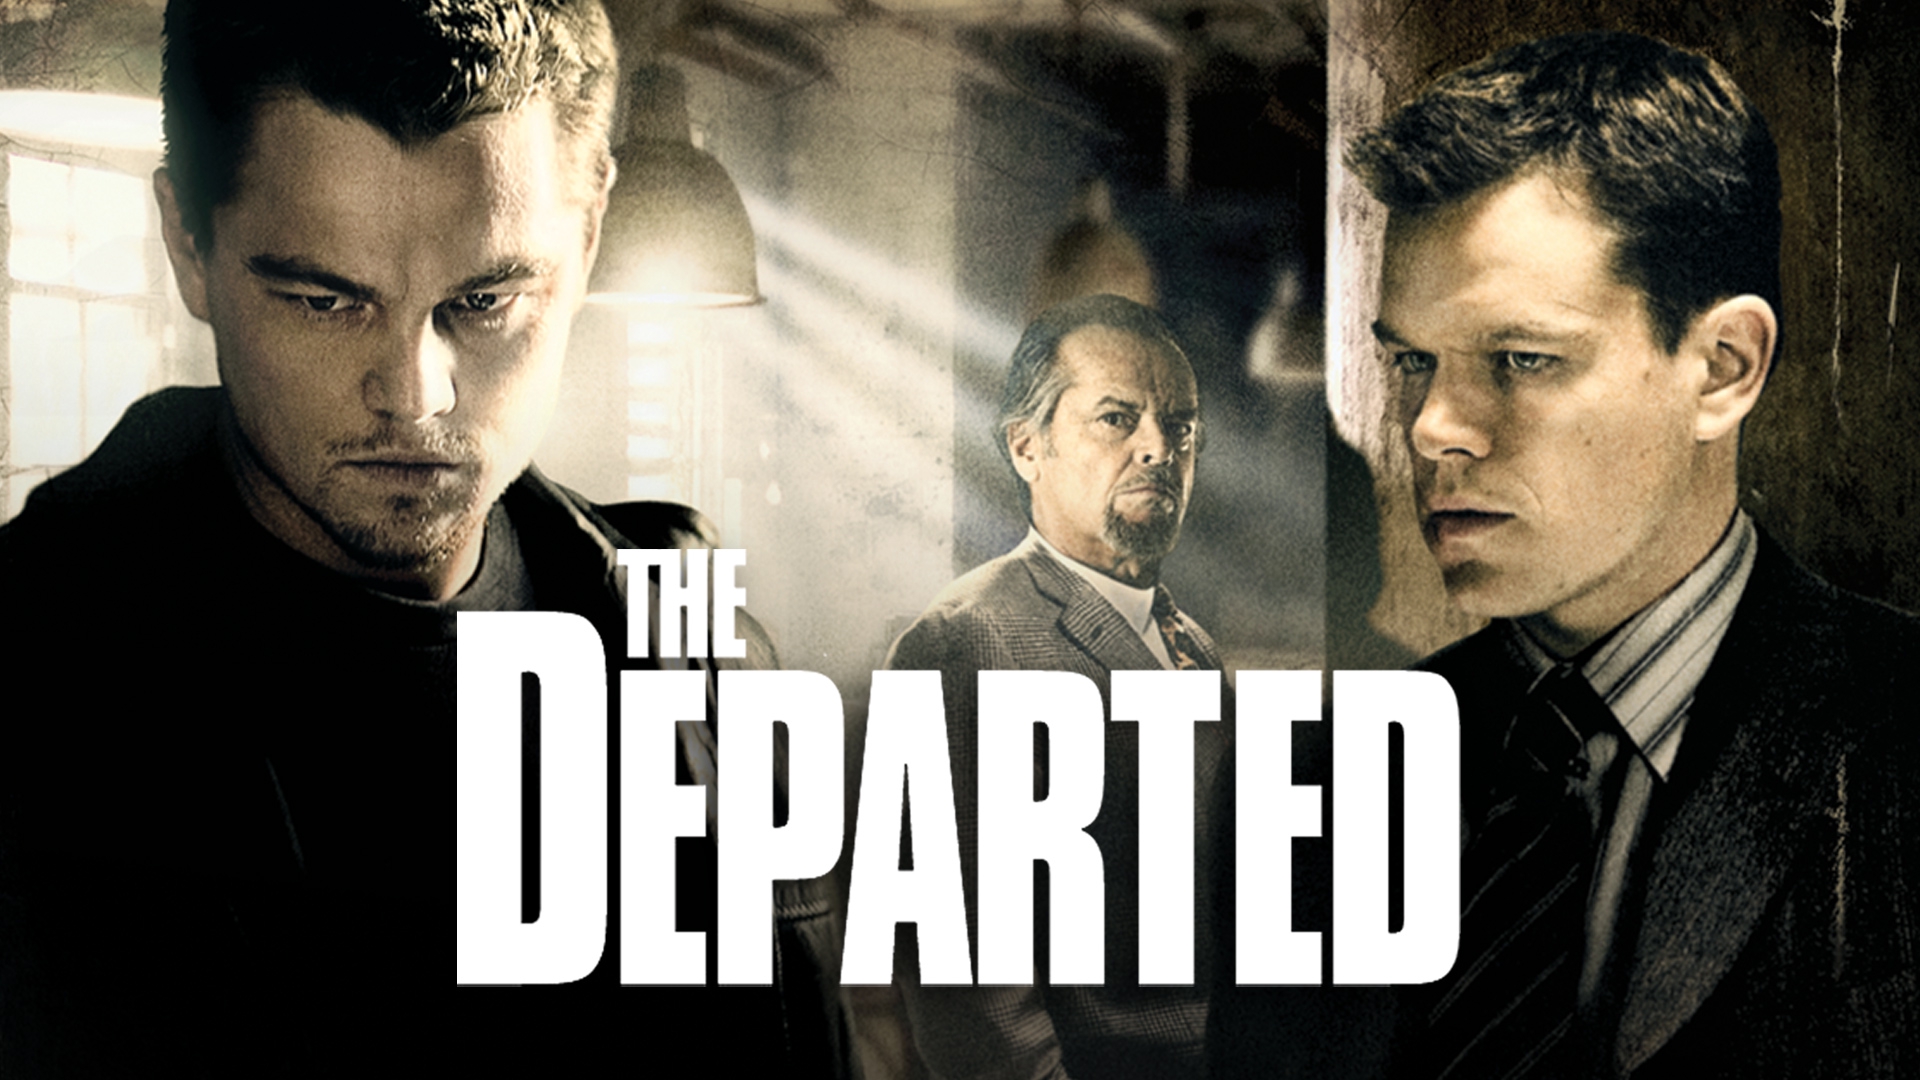 Watch The Departed Online | Stream HD Movies | Stan